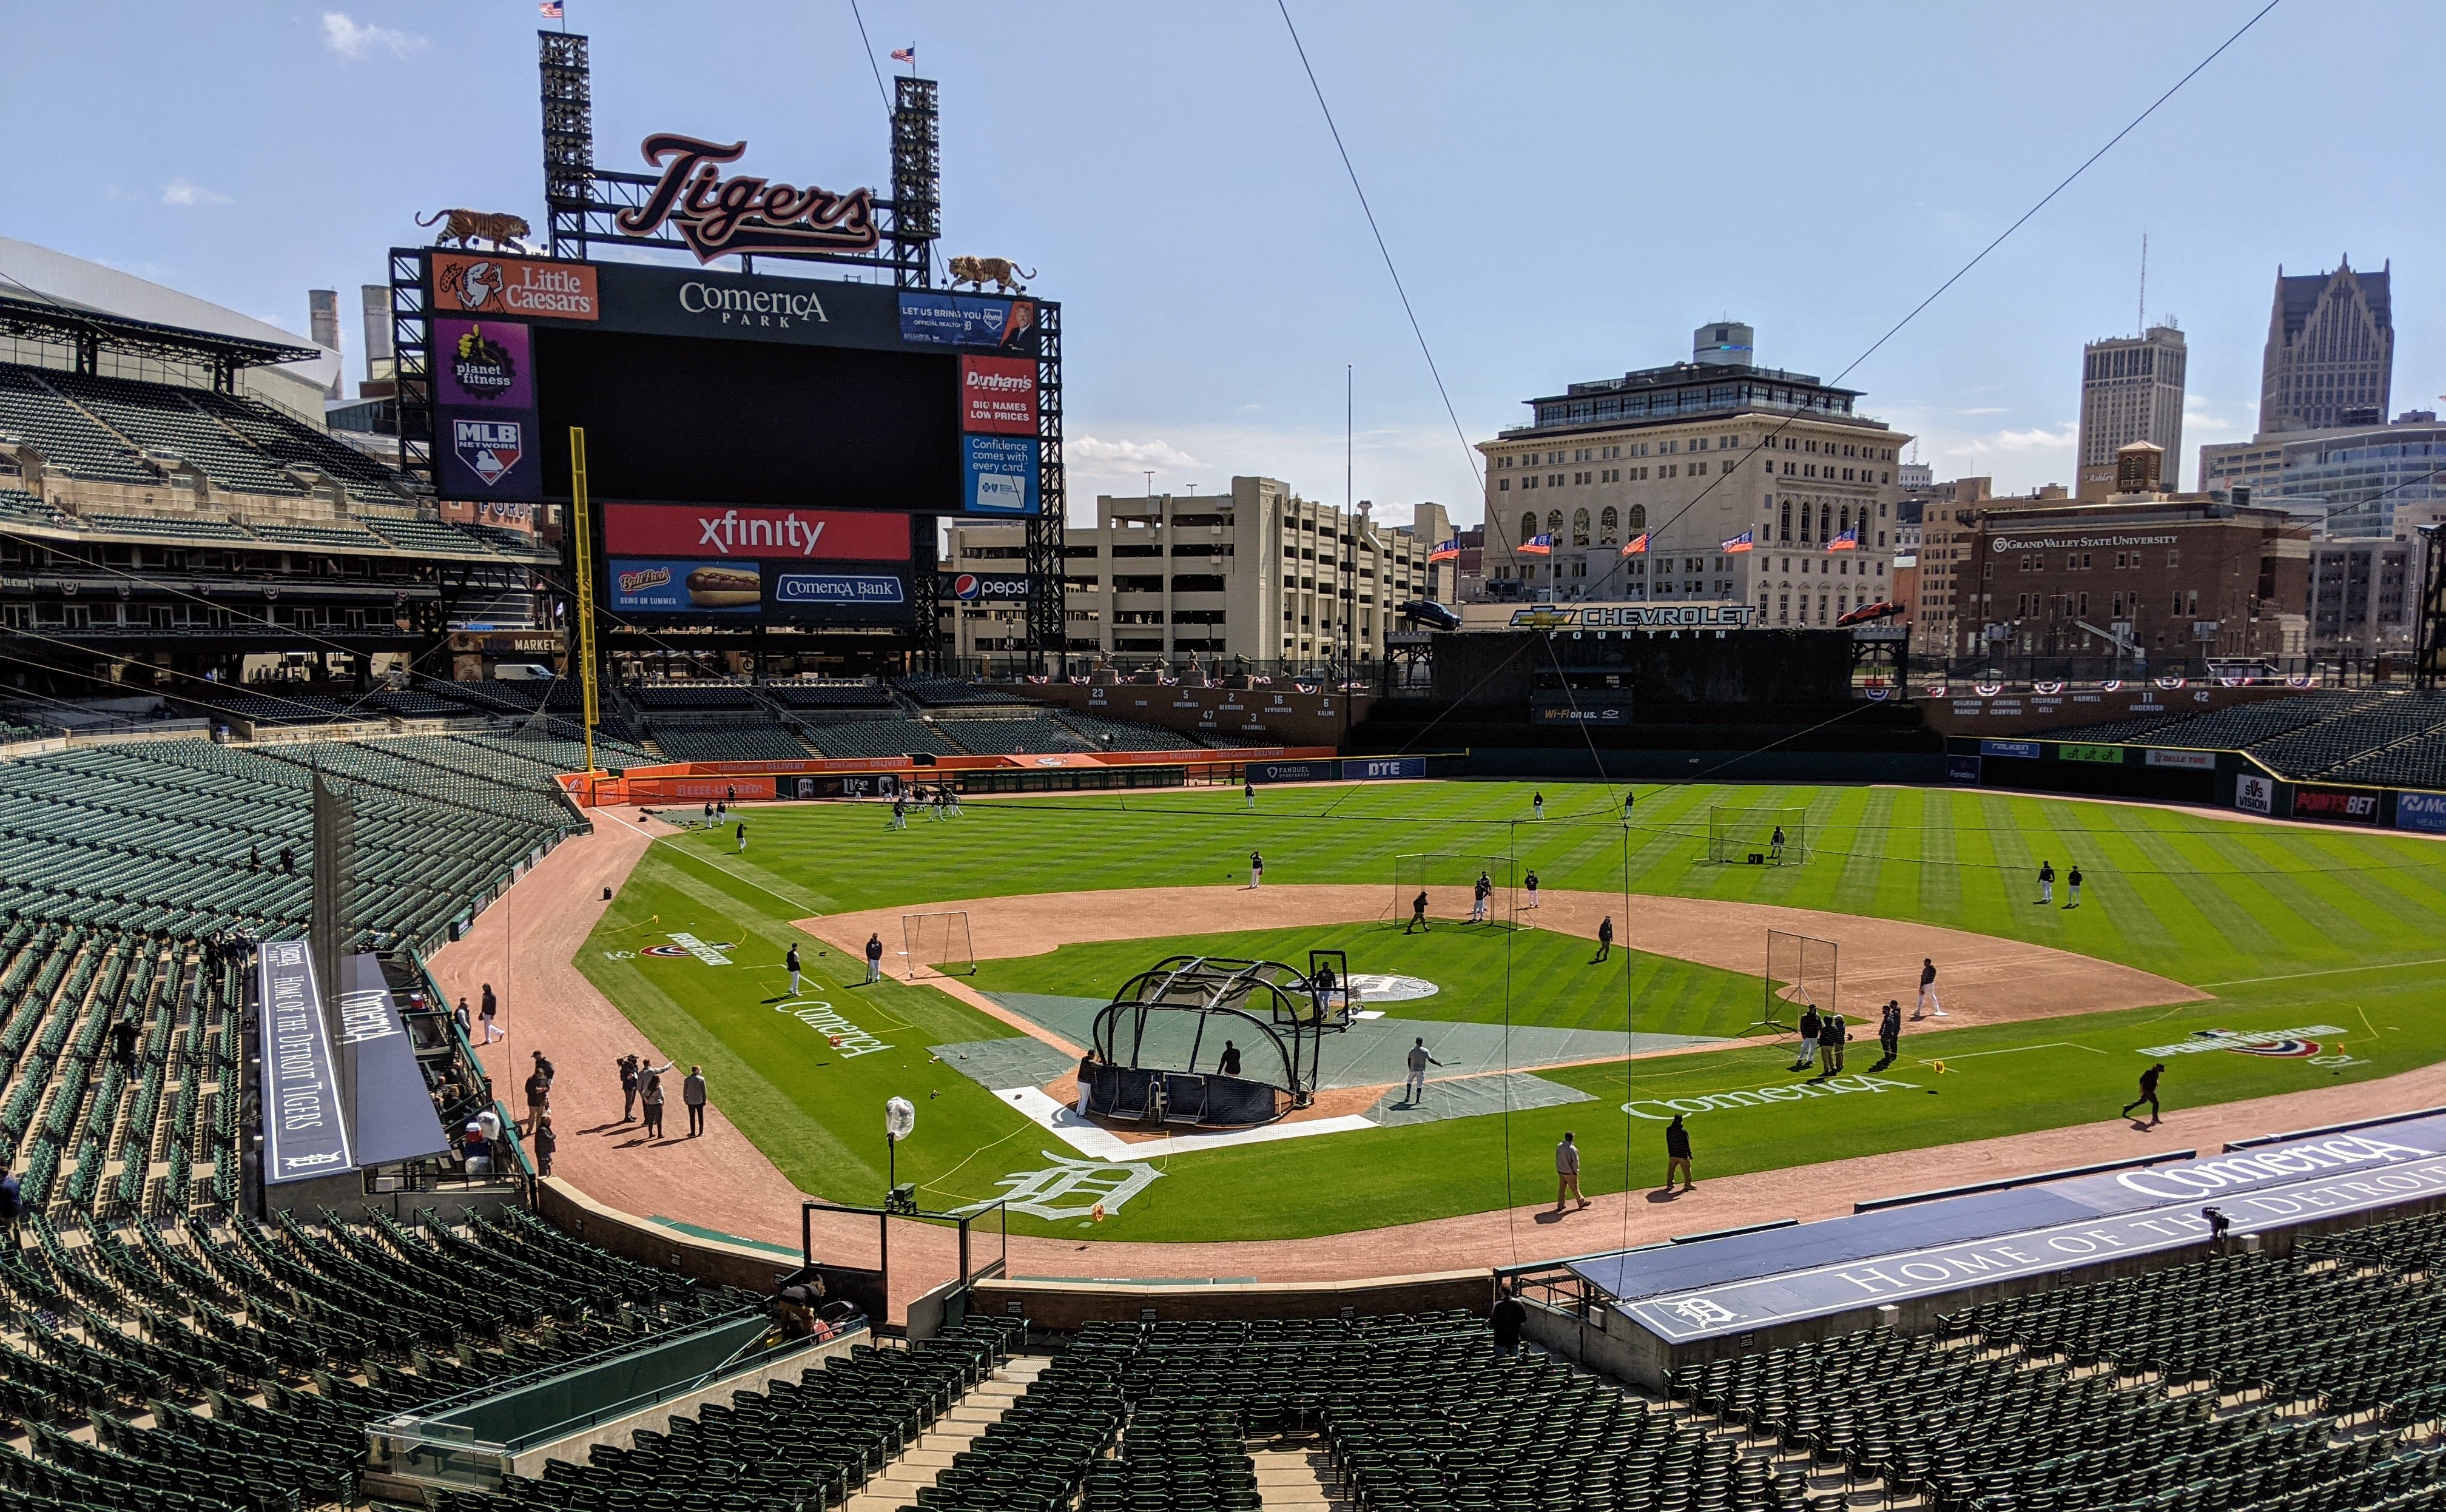 Tigers hosting special weekend events at Comerica Park